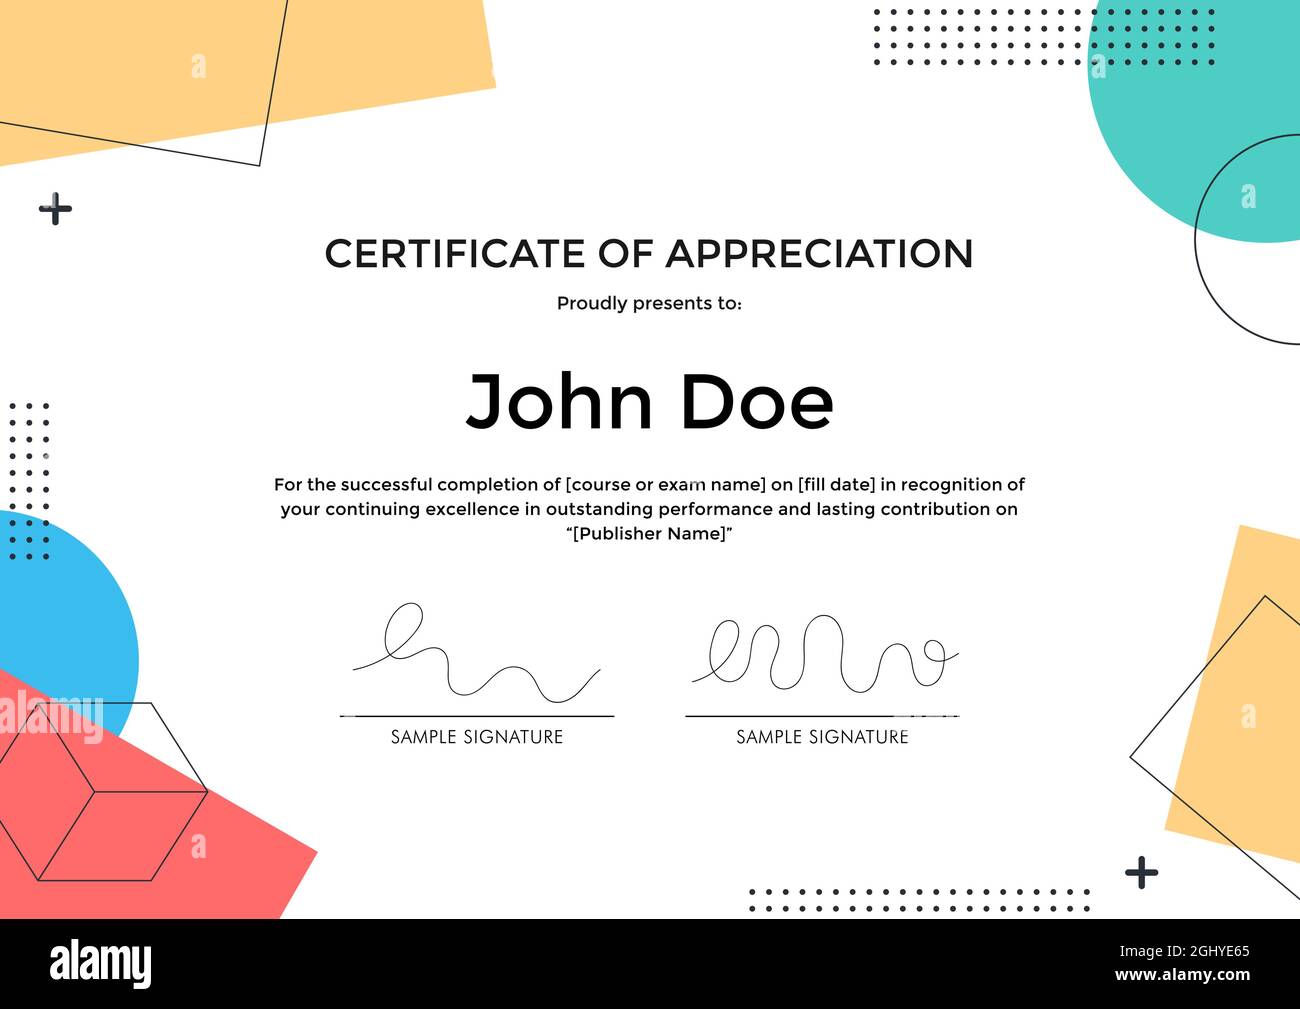 Certificate of Appreciation template with abstract geometric memphis style design. Stock Vector